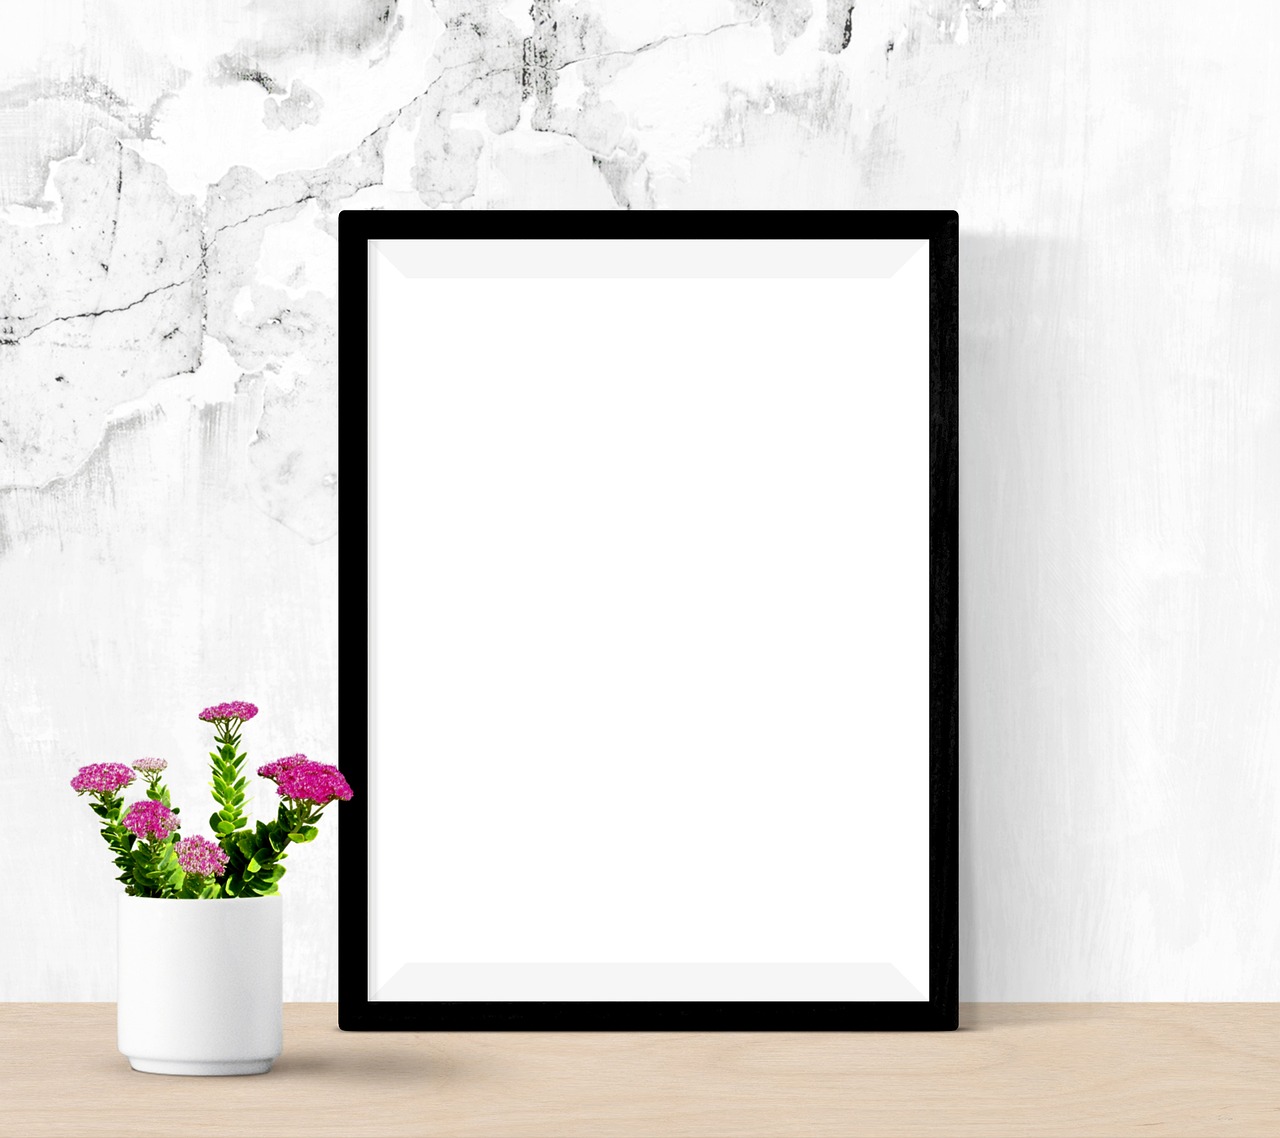 a picture frame sitting on top of a wooden table, a poster, minimalism, flowers in background, large vertical blank spaces, white marble, black border